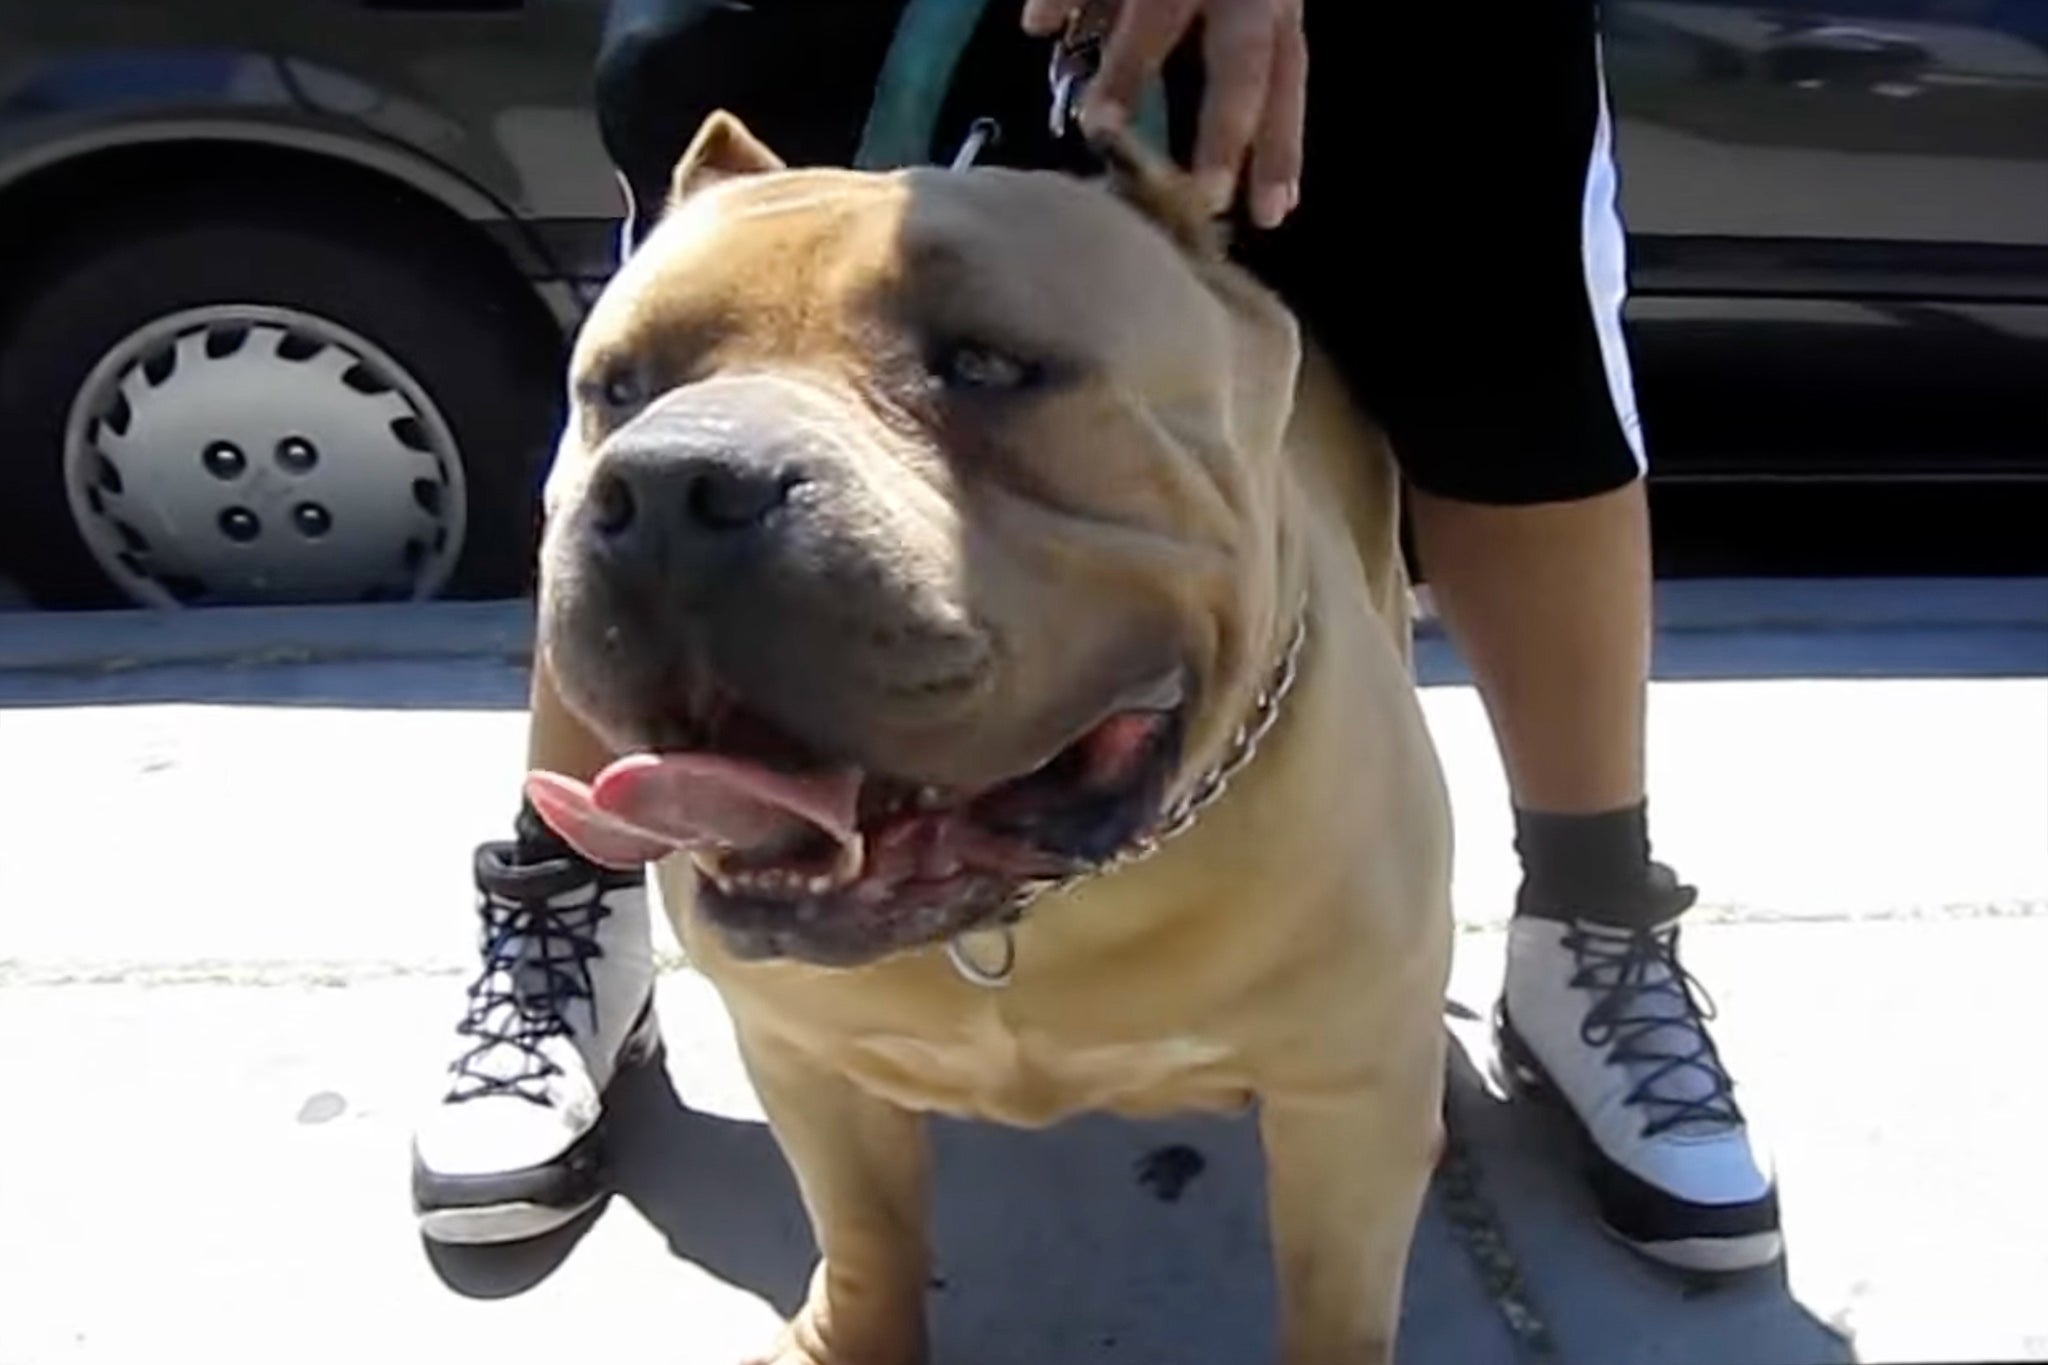 It is a total disgrace that the American bully dog is legal